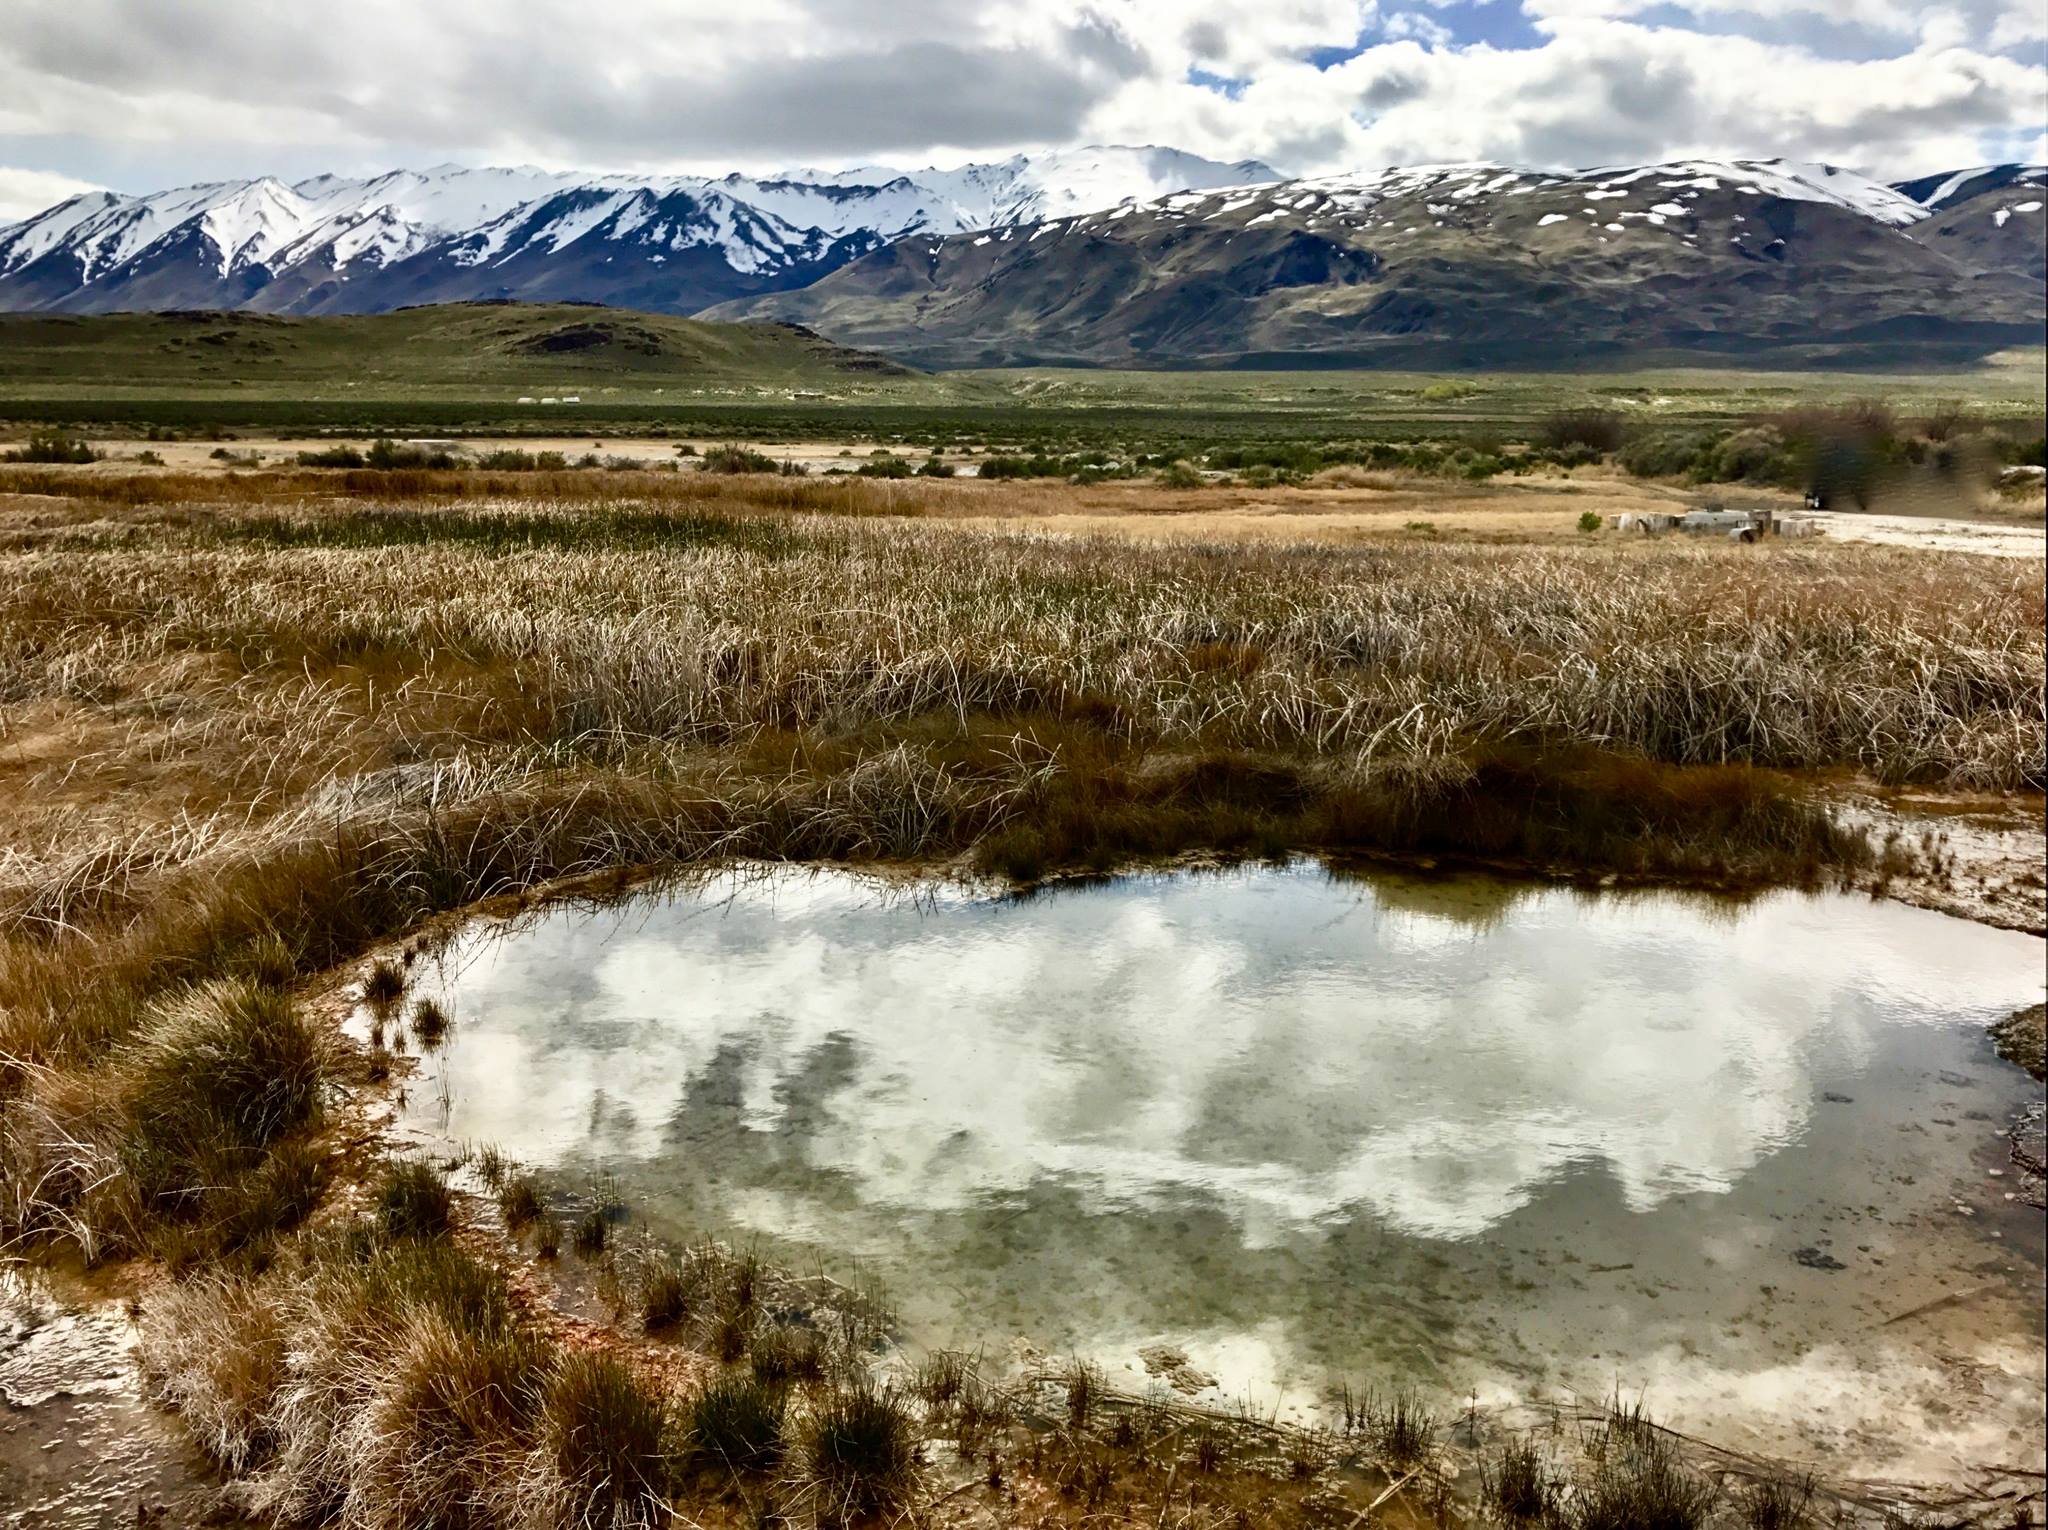 Fly Reservoir + Granite Range, Fly Ranch, Hualapai Geothermal Flats / Image by Will Roger